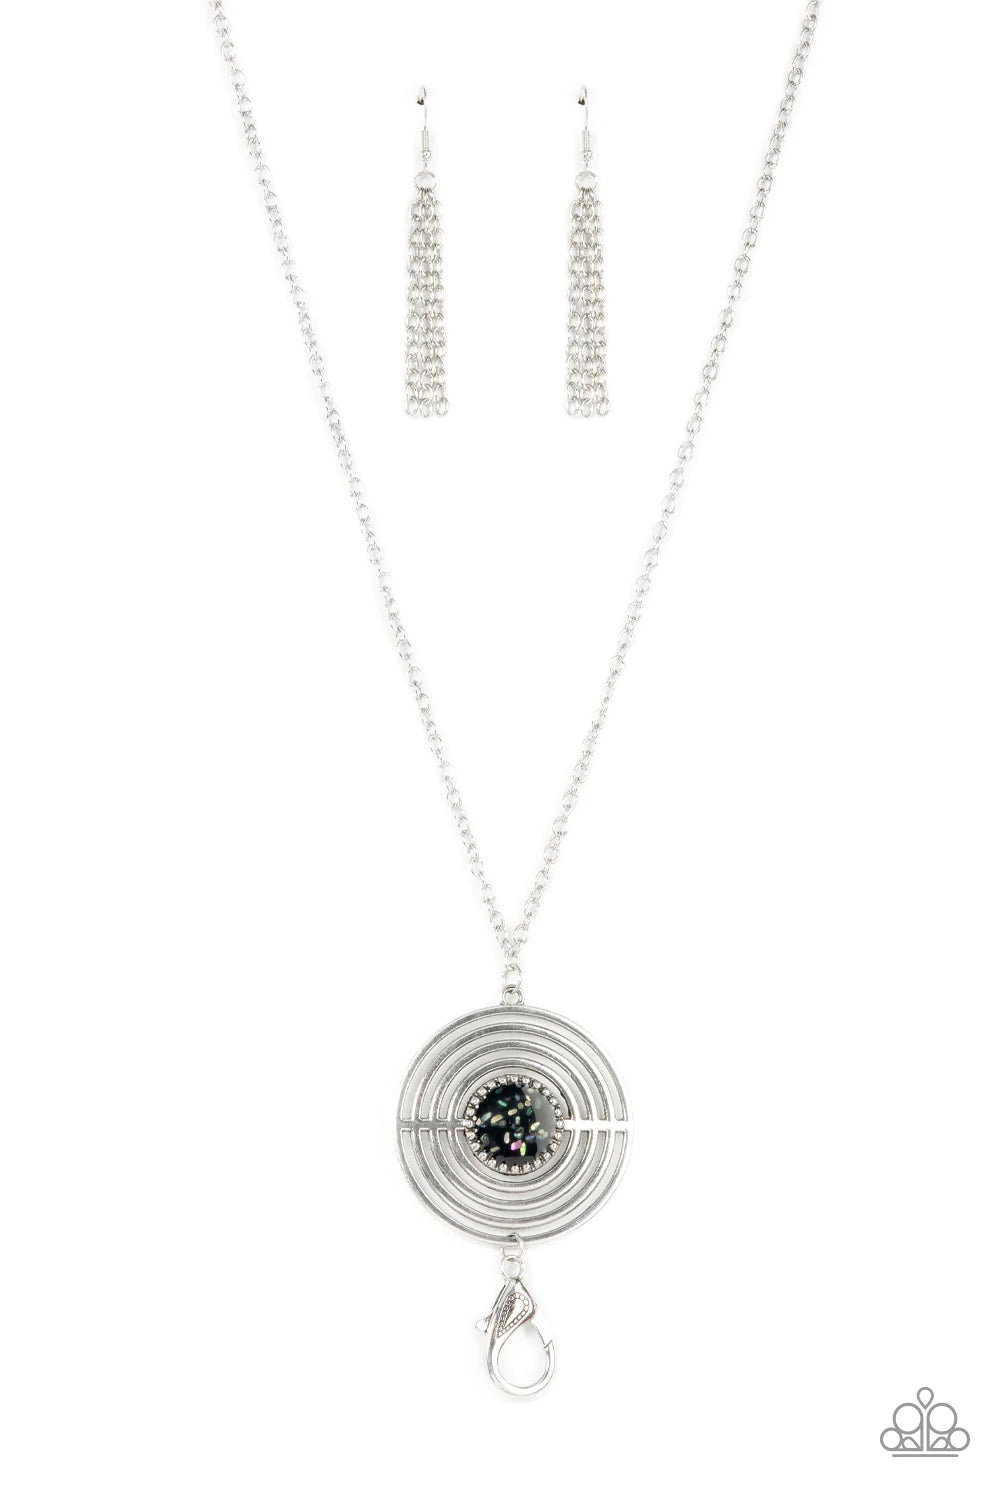 Paparazzi Accessories Targeted Tranquility - Black *Lanyard Flecked in iridescent shell-like accents, a studded black frame adorns the center of an oversized silver pendant rippling with concentric circles at the bottom of an extended silver chain for a d